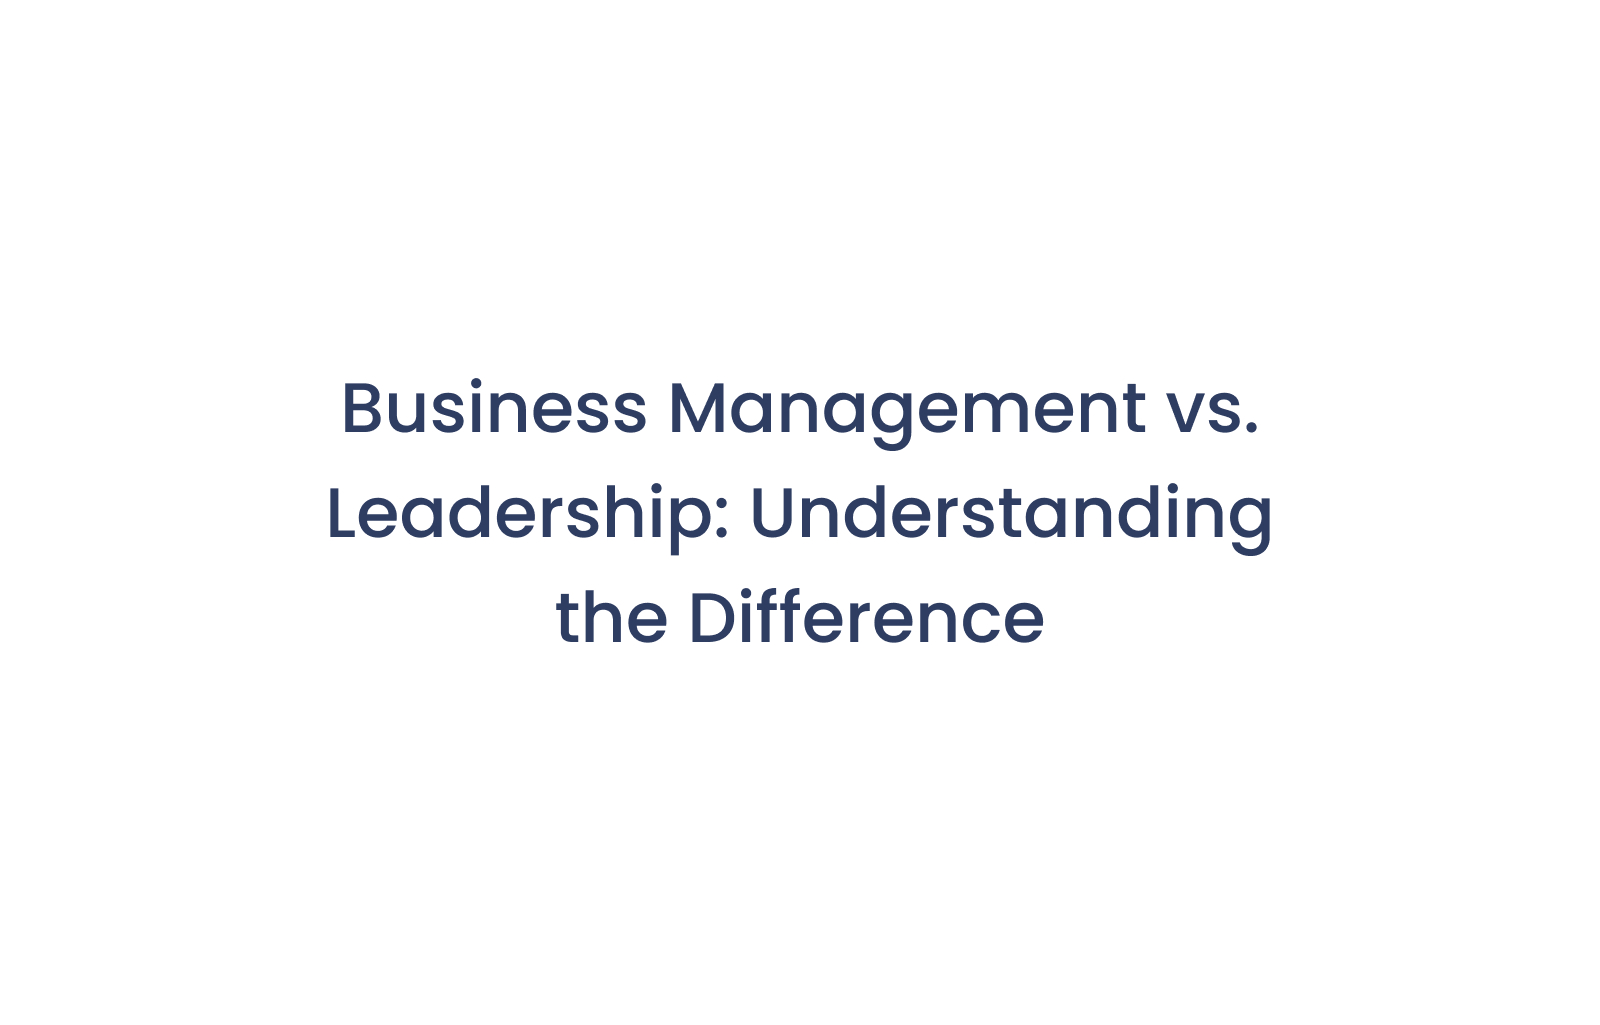 Business Management vs. Leadership: Understanding the Difference